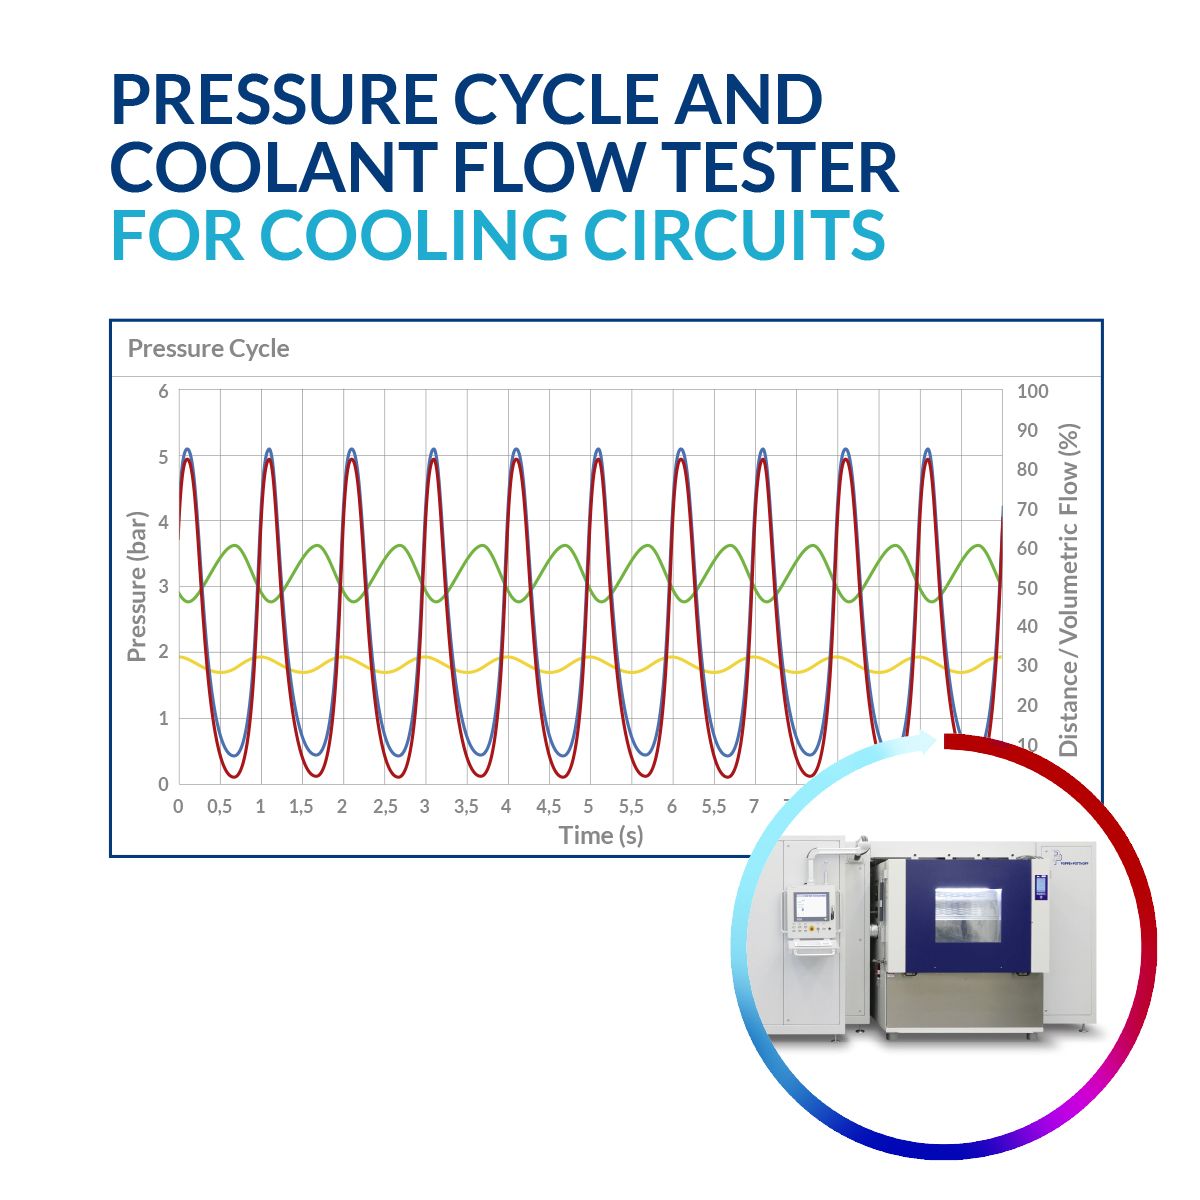 sinusoidal pressure curve, glycol flow, pressure cycle test rig and climate test chamber